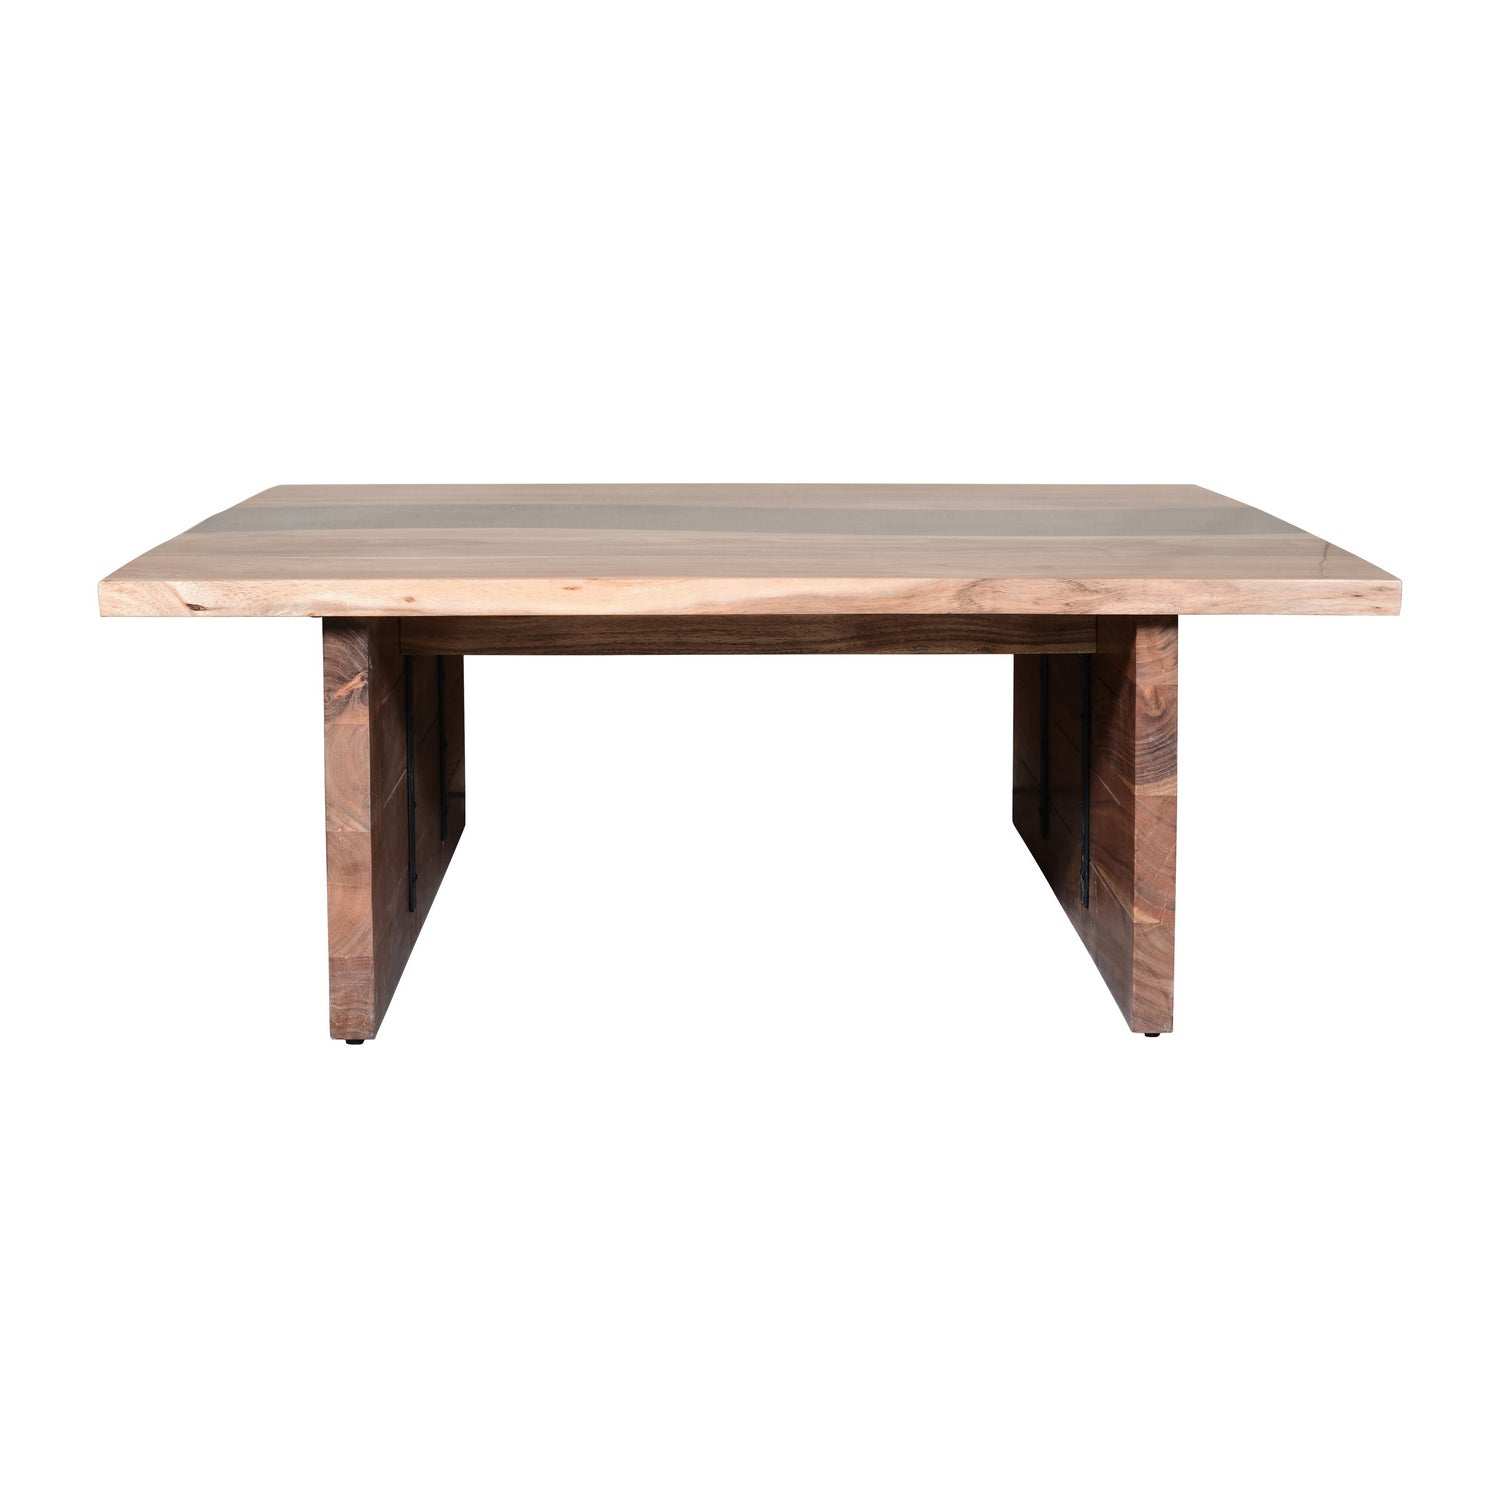 ELK Home - H0805-9387 - Coffee Table - River Wood - Natural